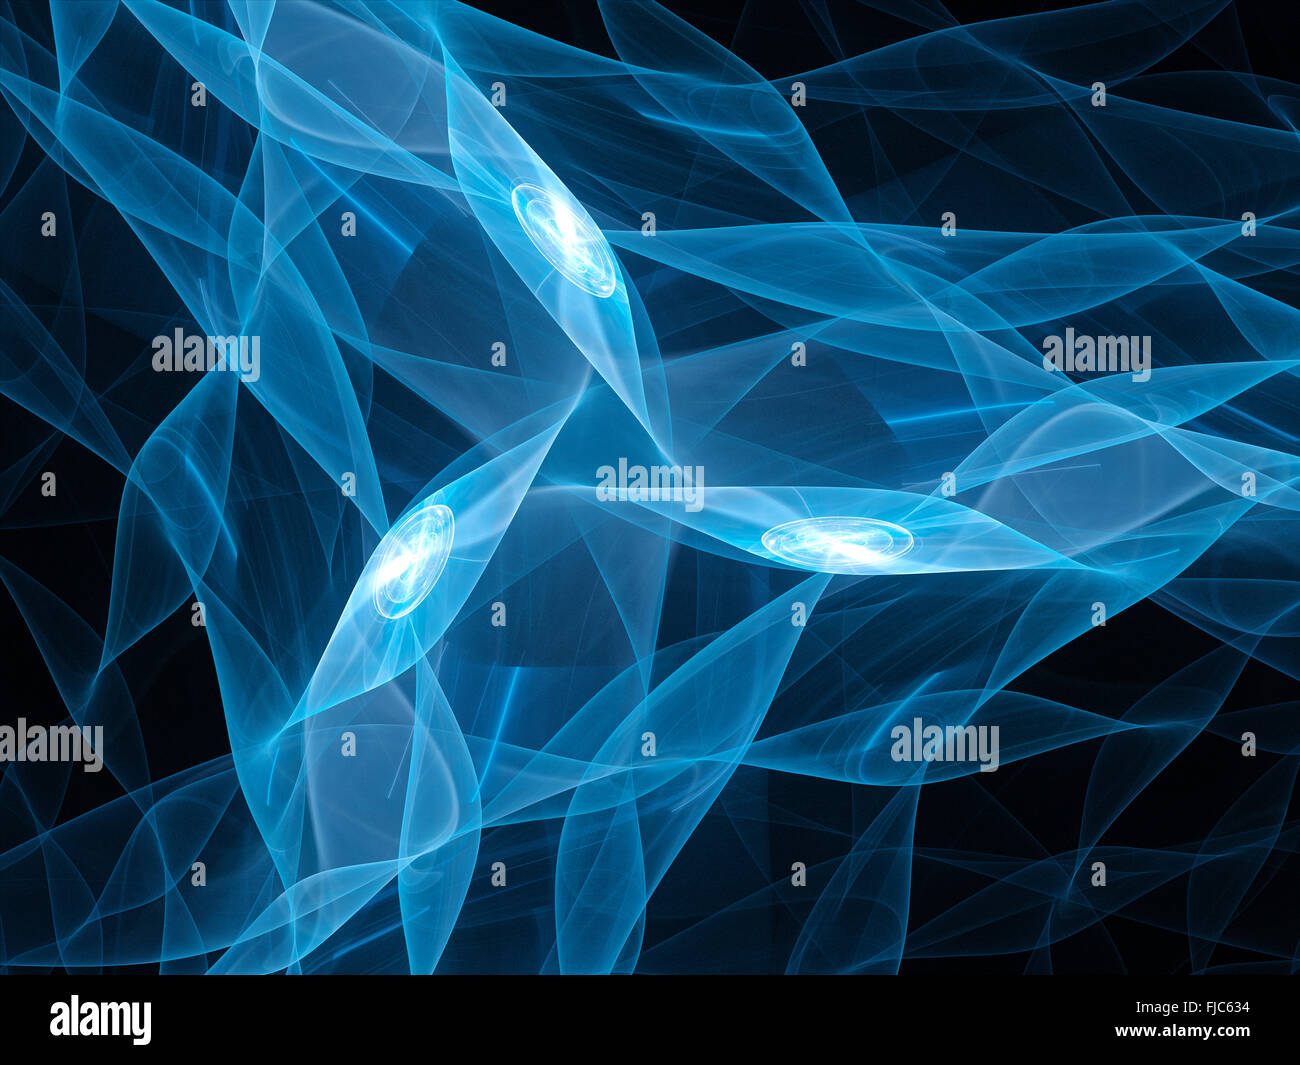 Blue glowing microprocessors, nanotechnology, computer generated abstract background Stock Photo